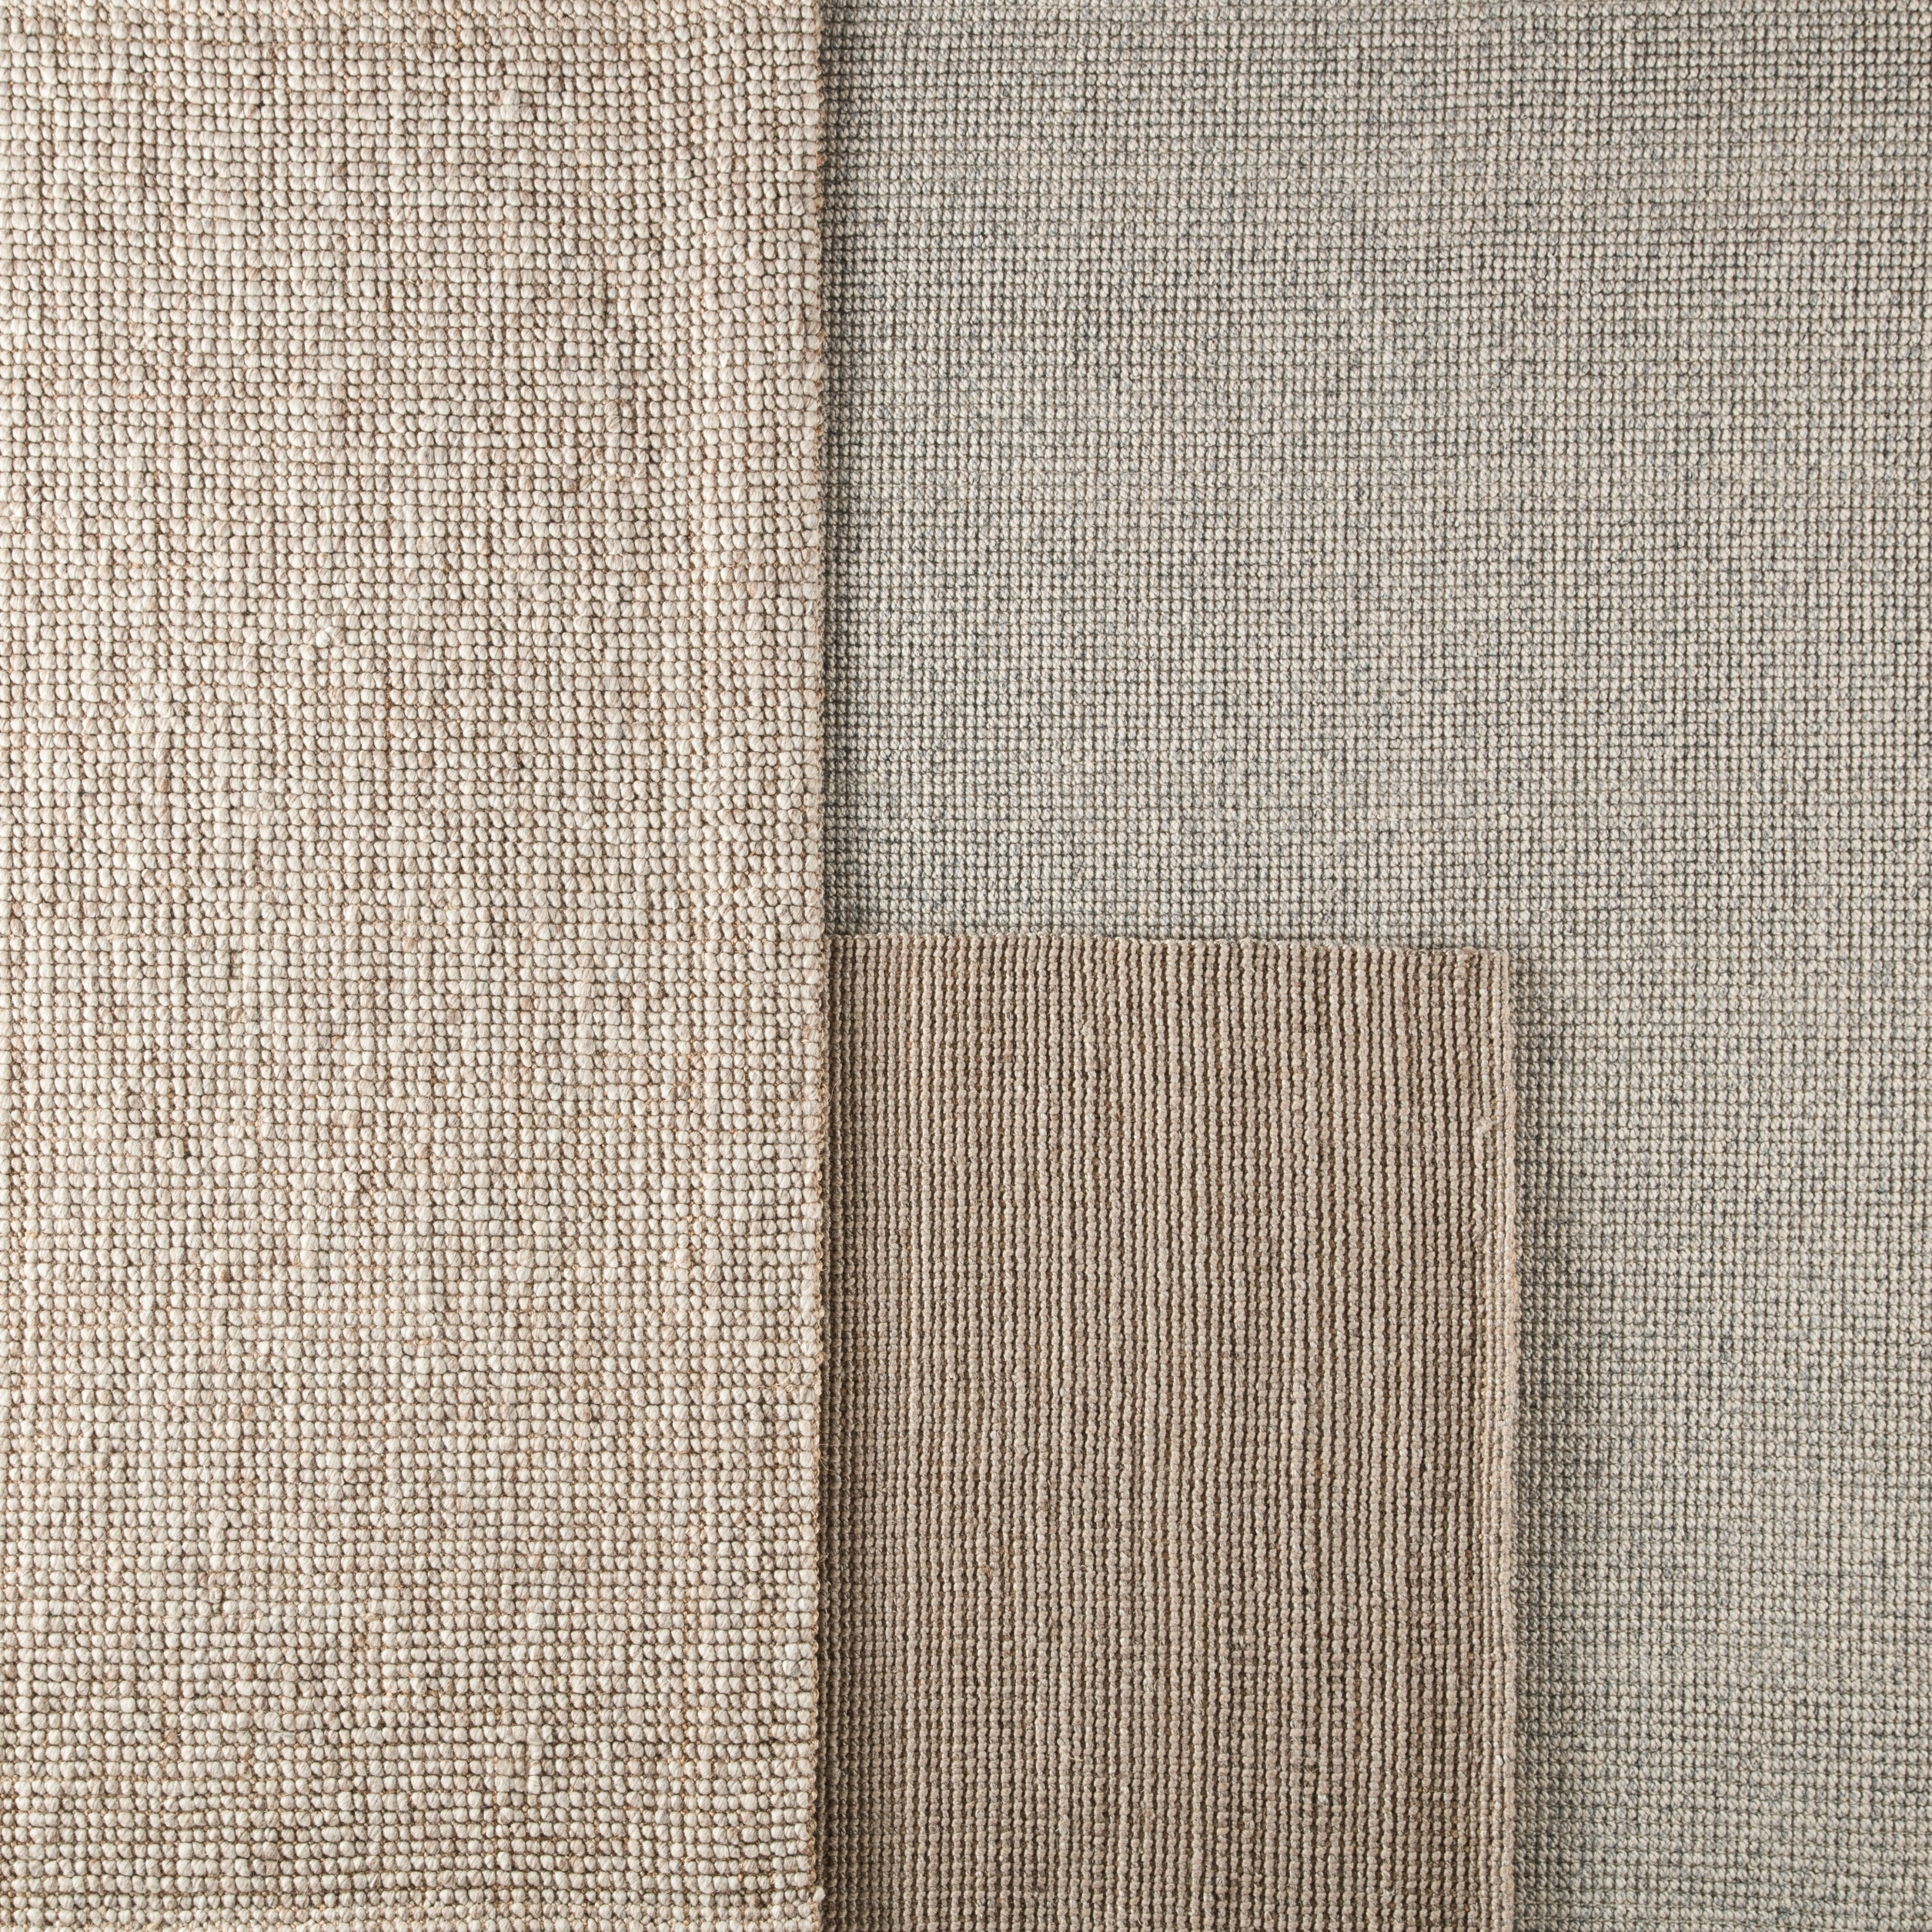 Beech Natural Solid Tan/ Taupe Area Rug (9'X12') - Image 5